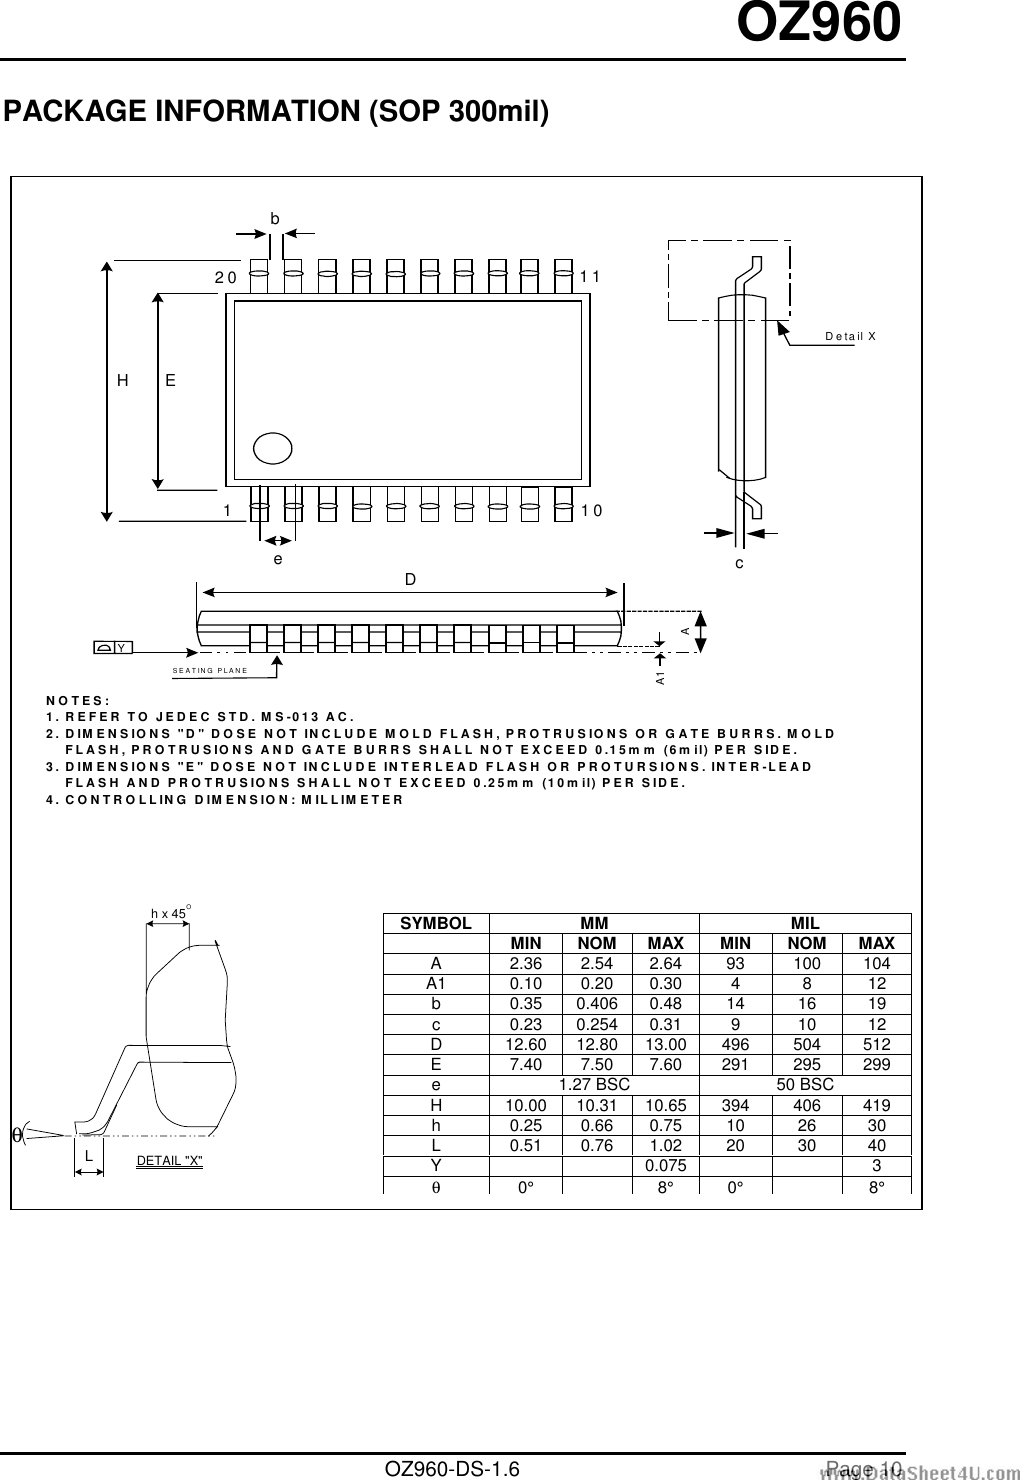 Page 10 of 12 - CCFL Backlight Controller 2008129131956425